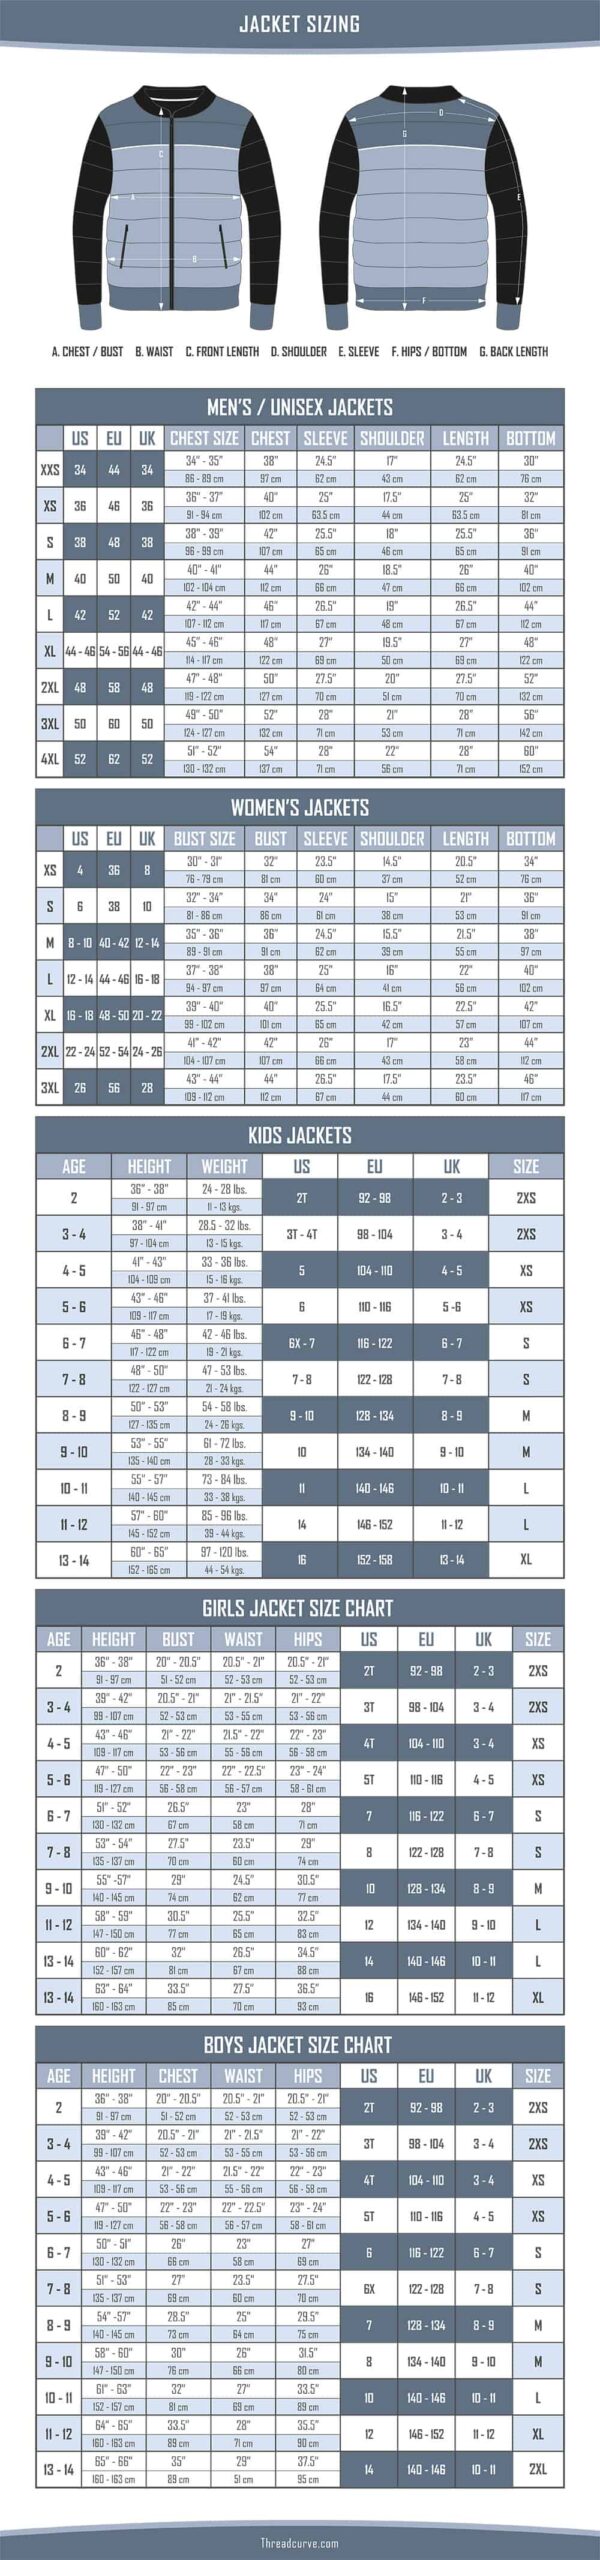 This is the Jacket Sizing Chart.